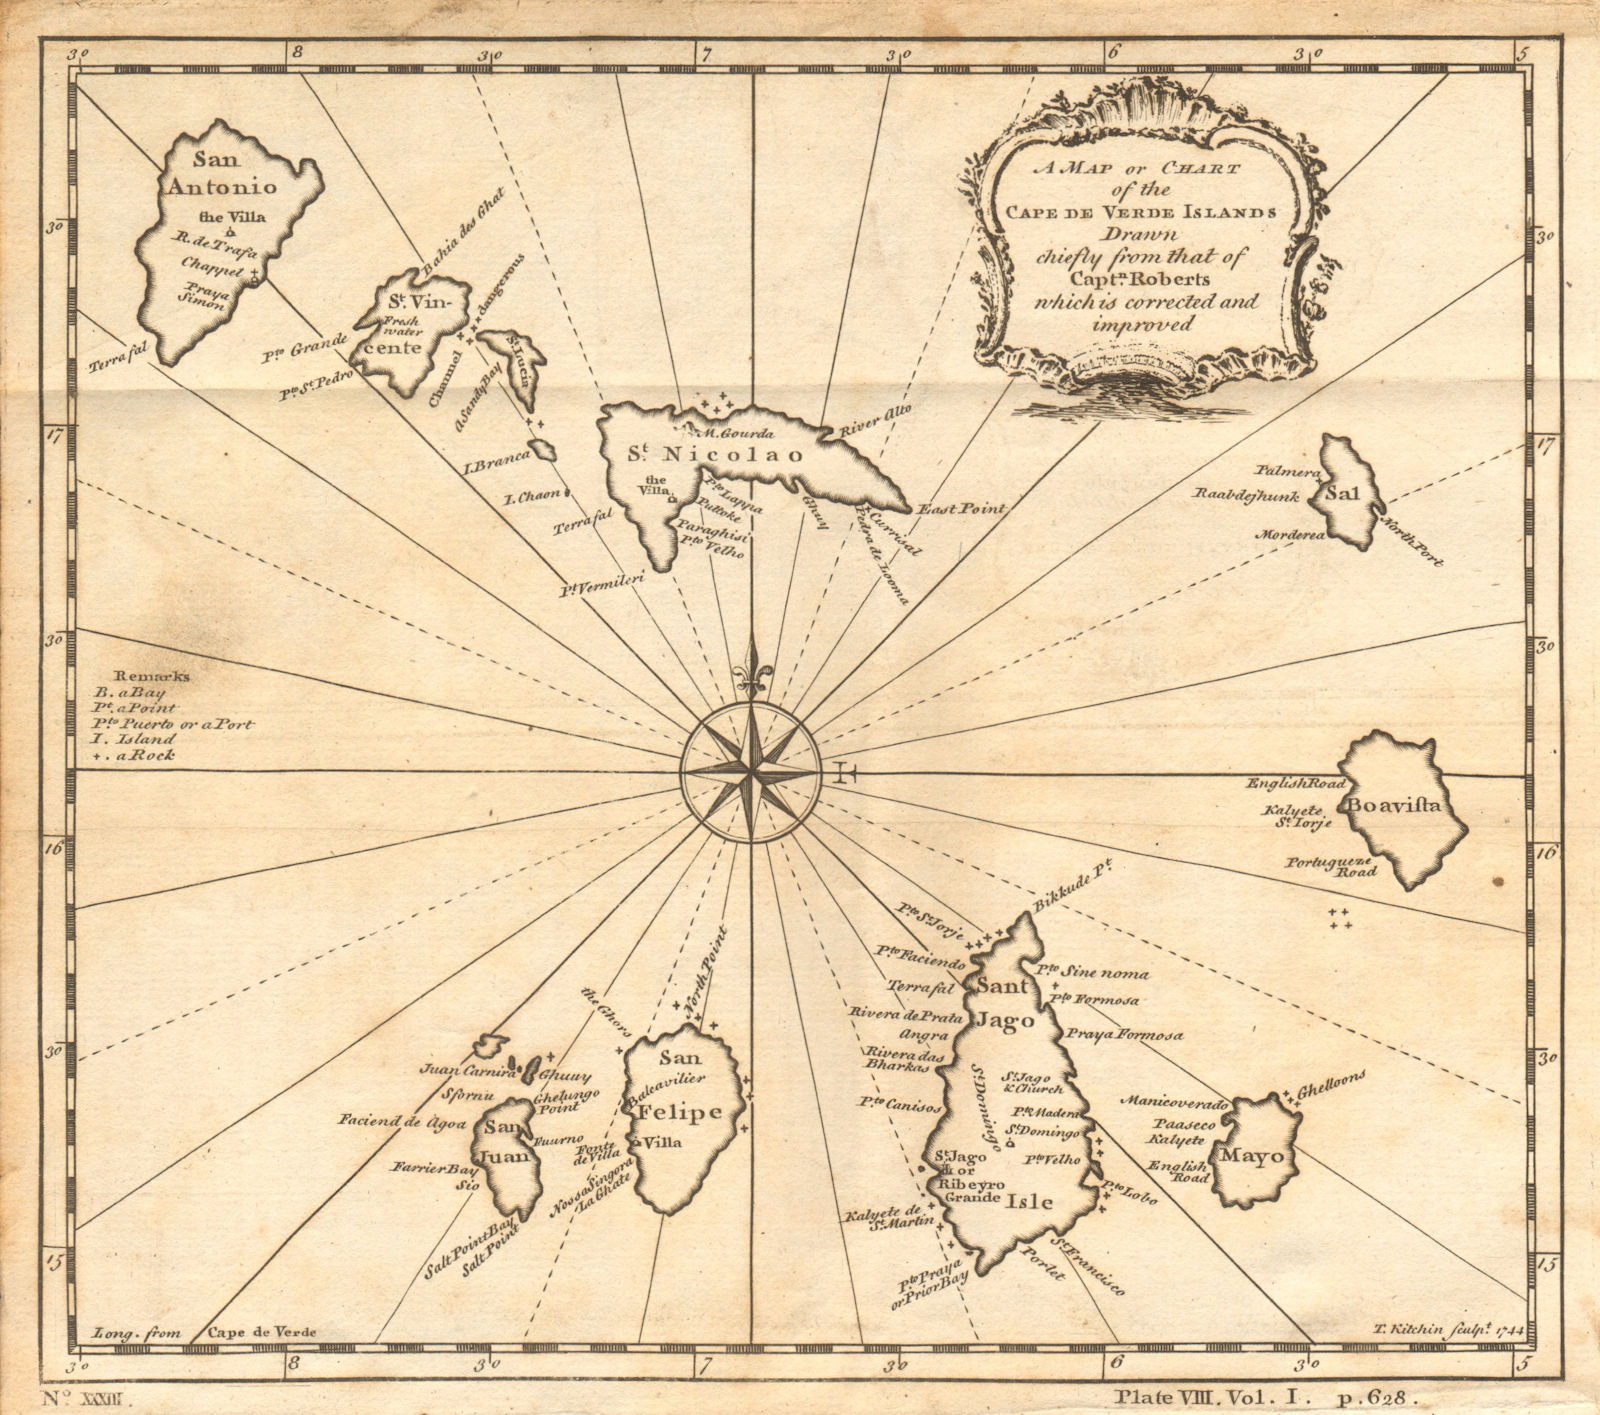 Associate Product A map or chart of the of the Cape de Verde Islands. KITCHIN 1745 old